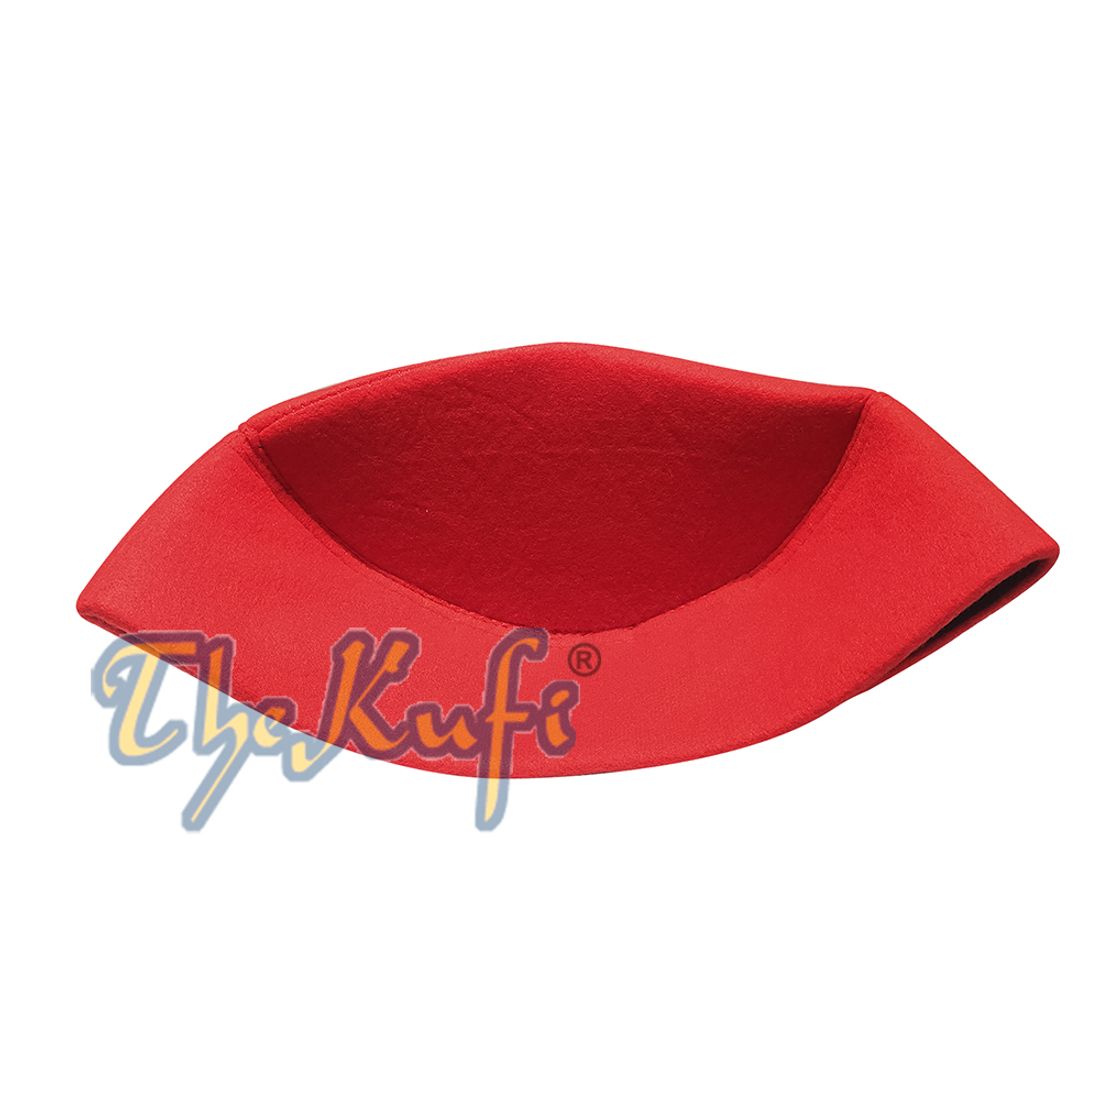 Handmade Pointed Top Red Faux Felt Kufi